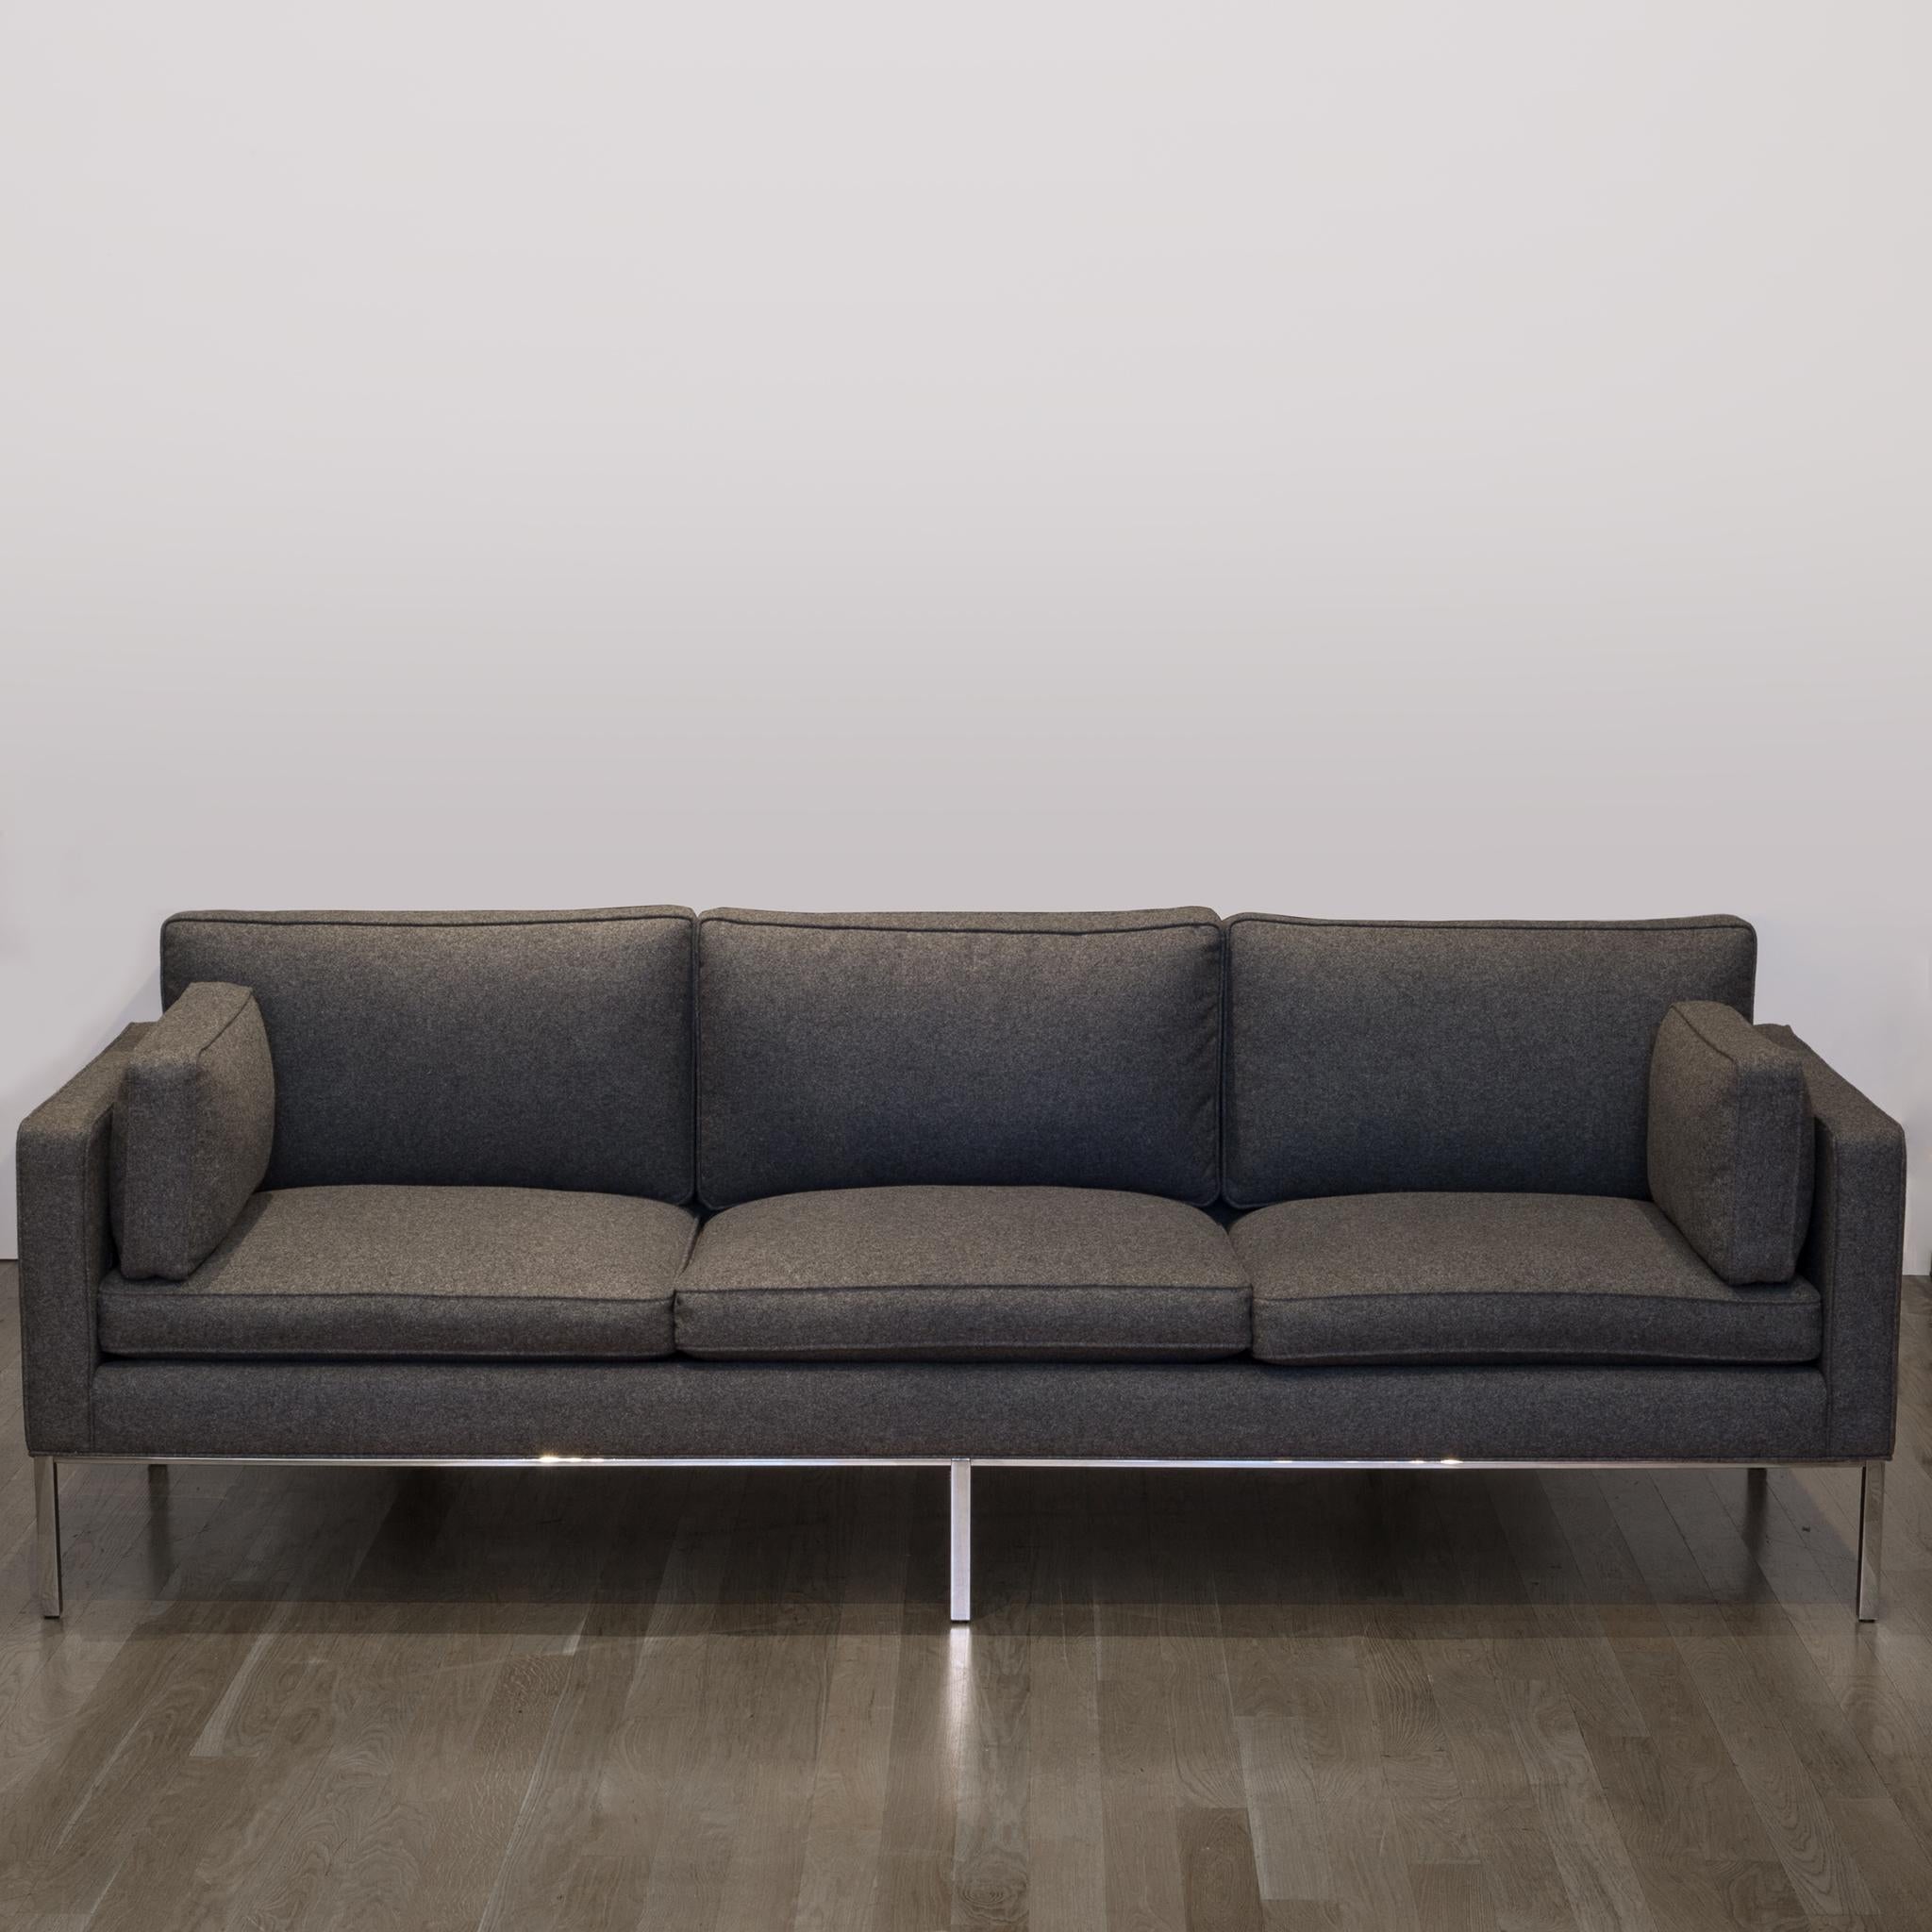 Like New Artifort 905-3 seat comfort sofa
Includes matching side cushions.
Custom Divina Melange wool fabric.

The 905 comfort 3-seat sofa is versatile and comfortable. This sofa differs from the 905 sofa designed in 1964 in its extra side cushions